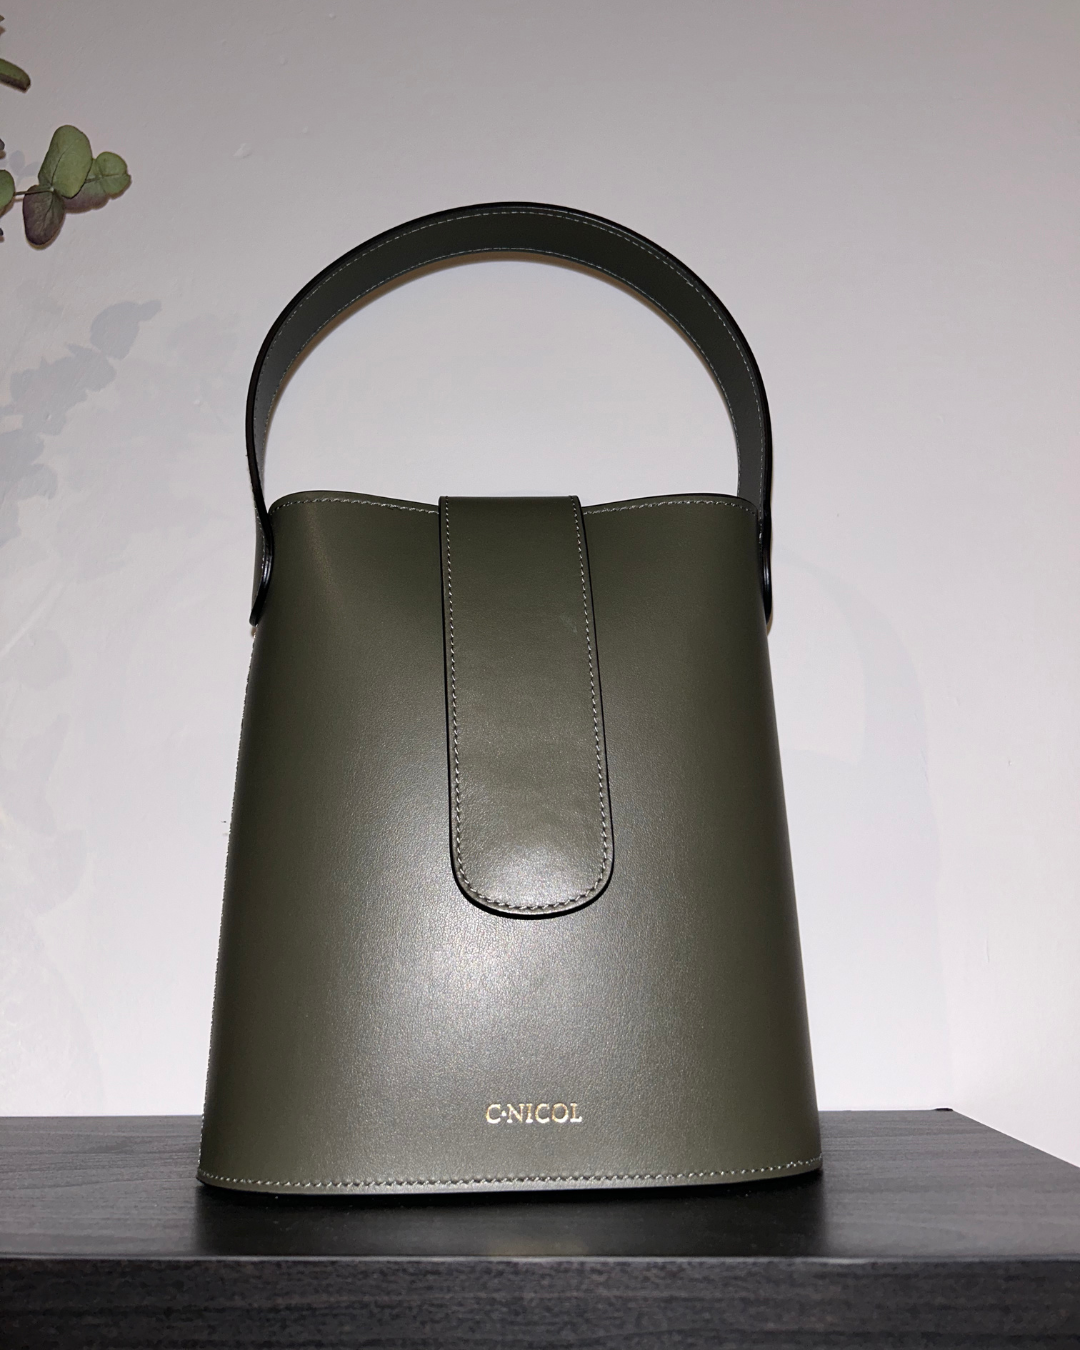 CNicol Green Leather Holly Bag on Dark Wooden Surface beside Eucalyptus